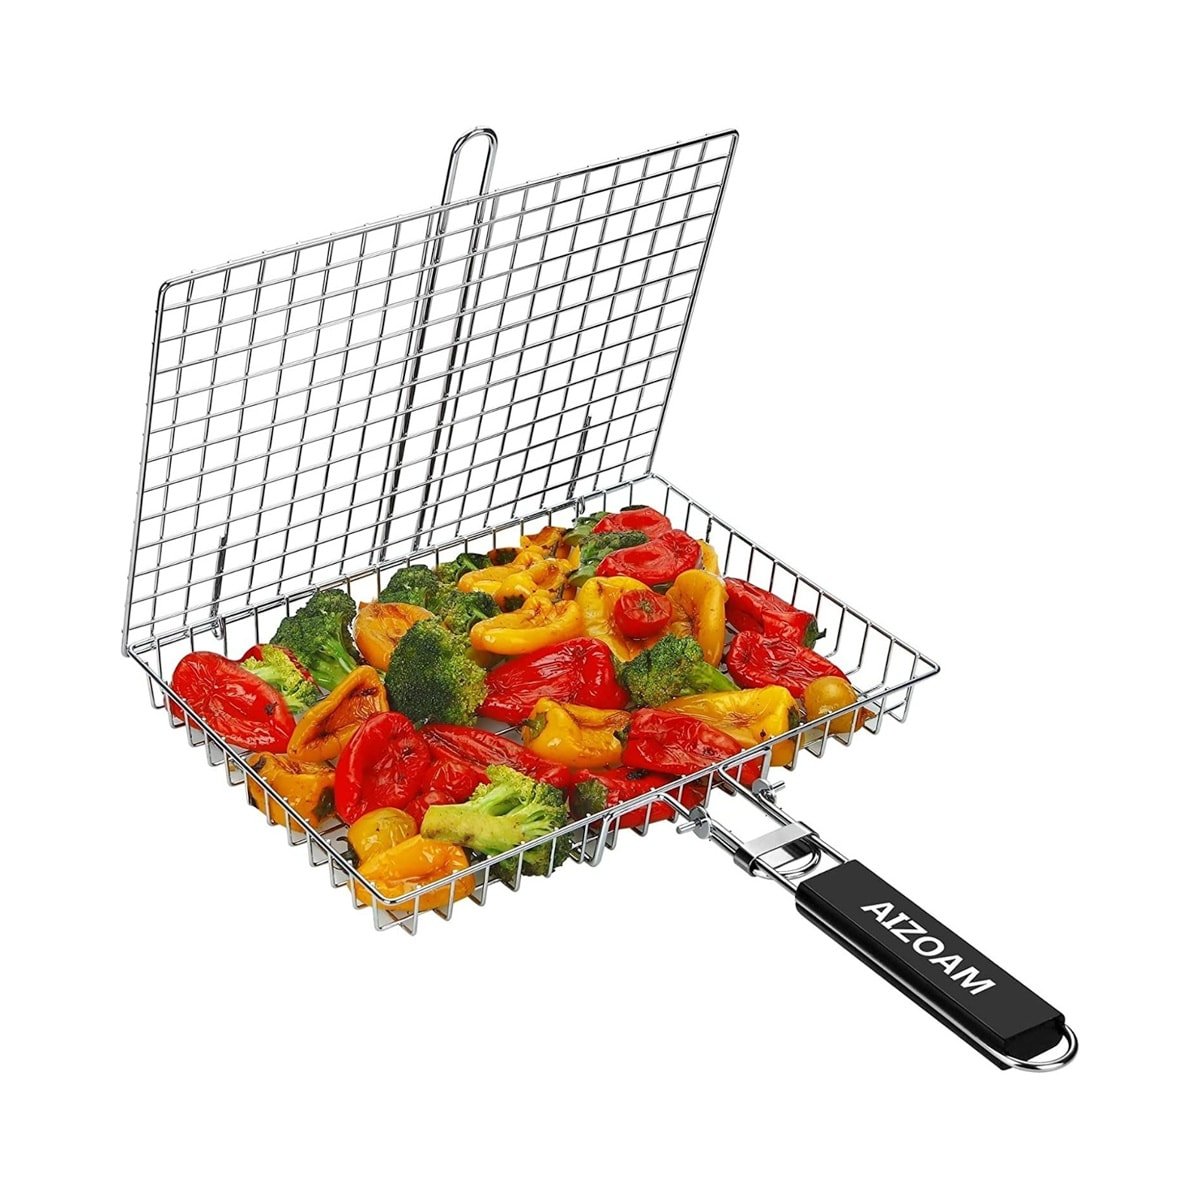 A stainless steel grated basket with handles that is open and filled with vegetables. 